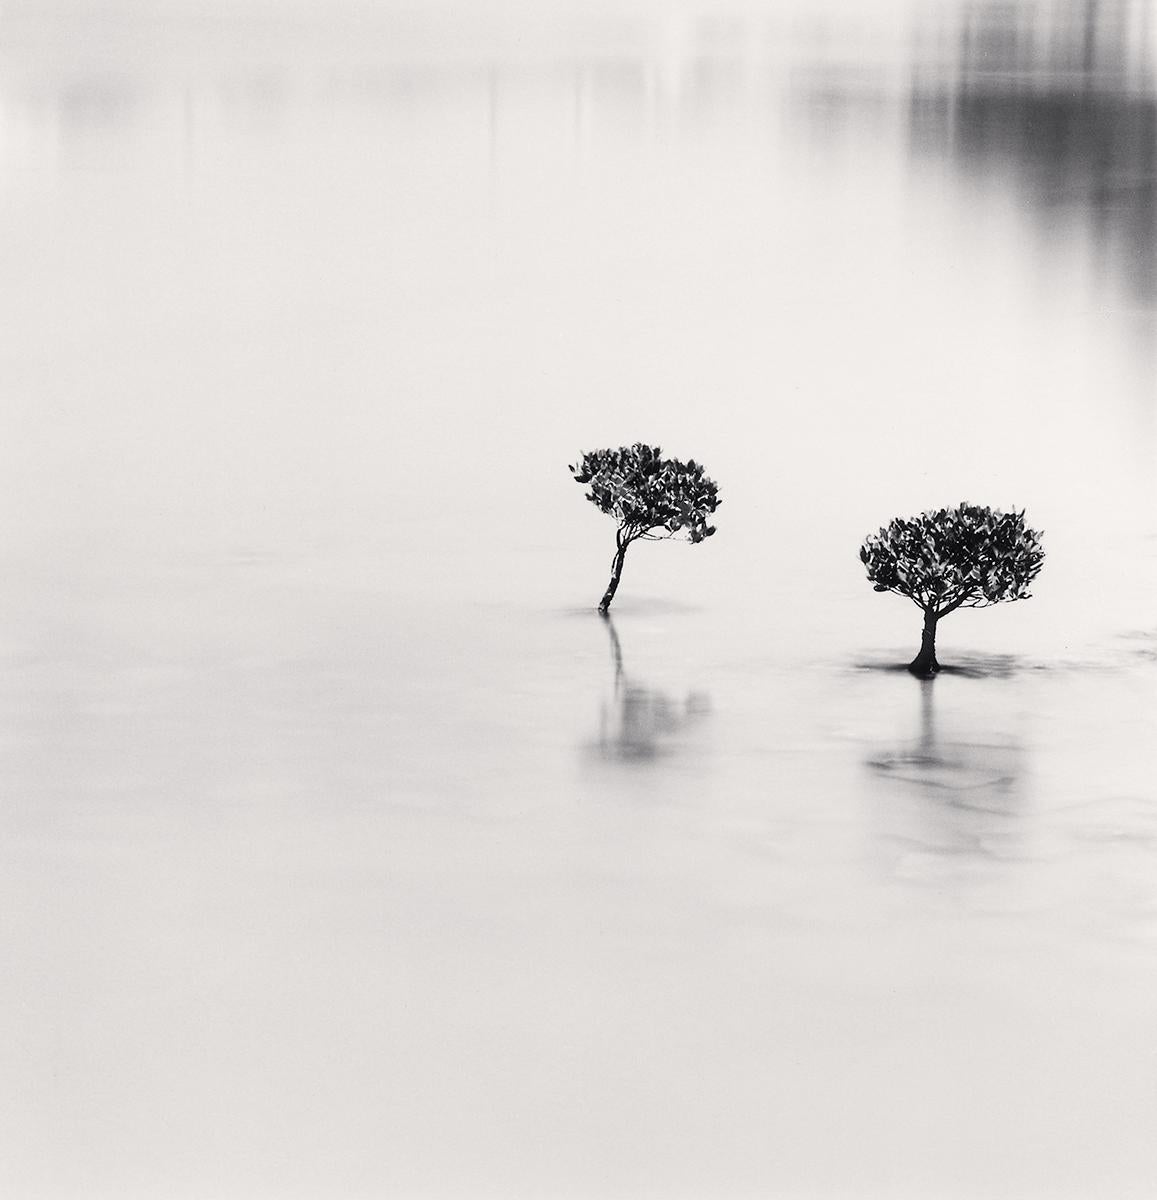 Two Mangrove Plants, Lantau Island, Hong Kong by Michael Kenna presents a sublime scene. Two small plants, resembling miniature trees, emerge from the surrounding water. The smooth water contrasts with the dark, detailed branches of the mangroves.